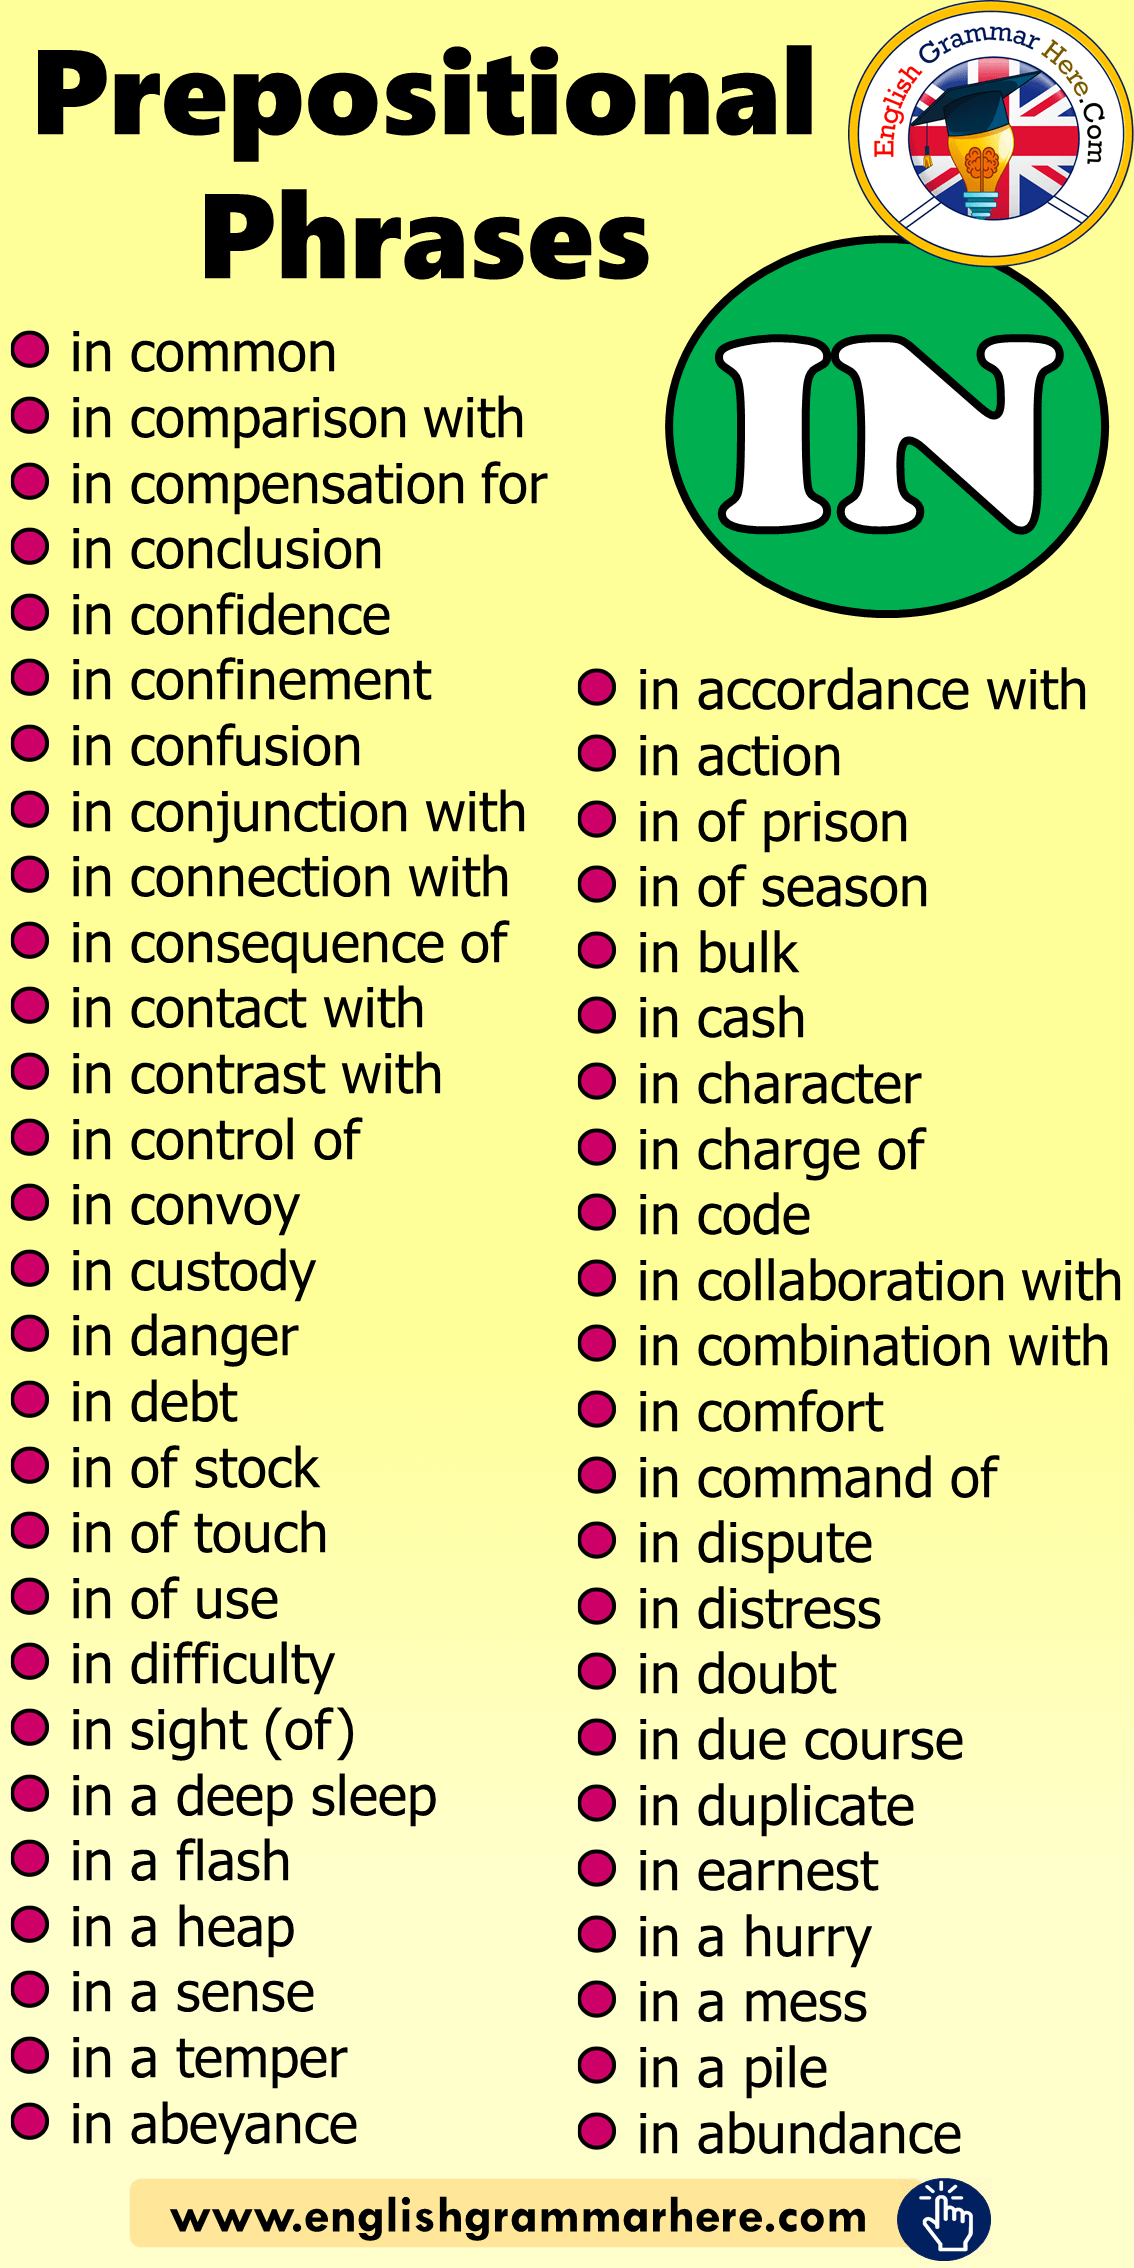 English Prepositional Phrases IN List, Example Phrases